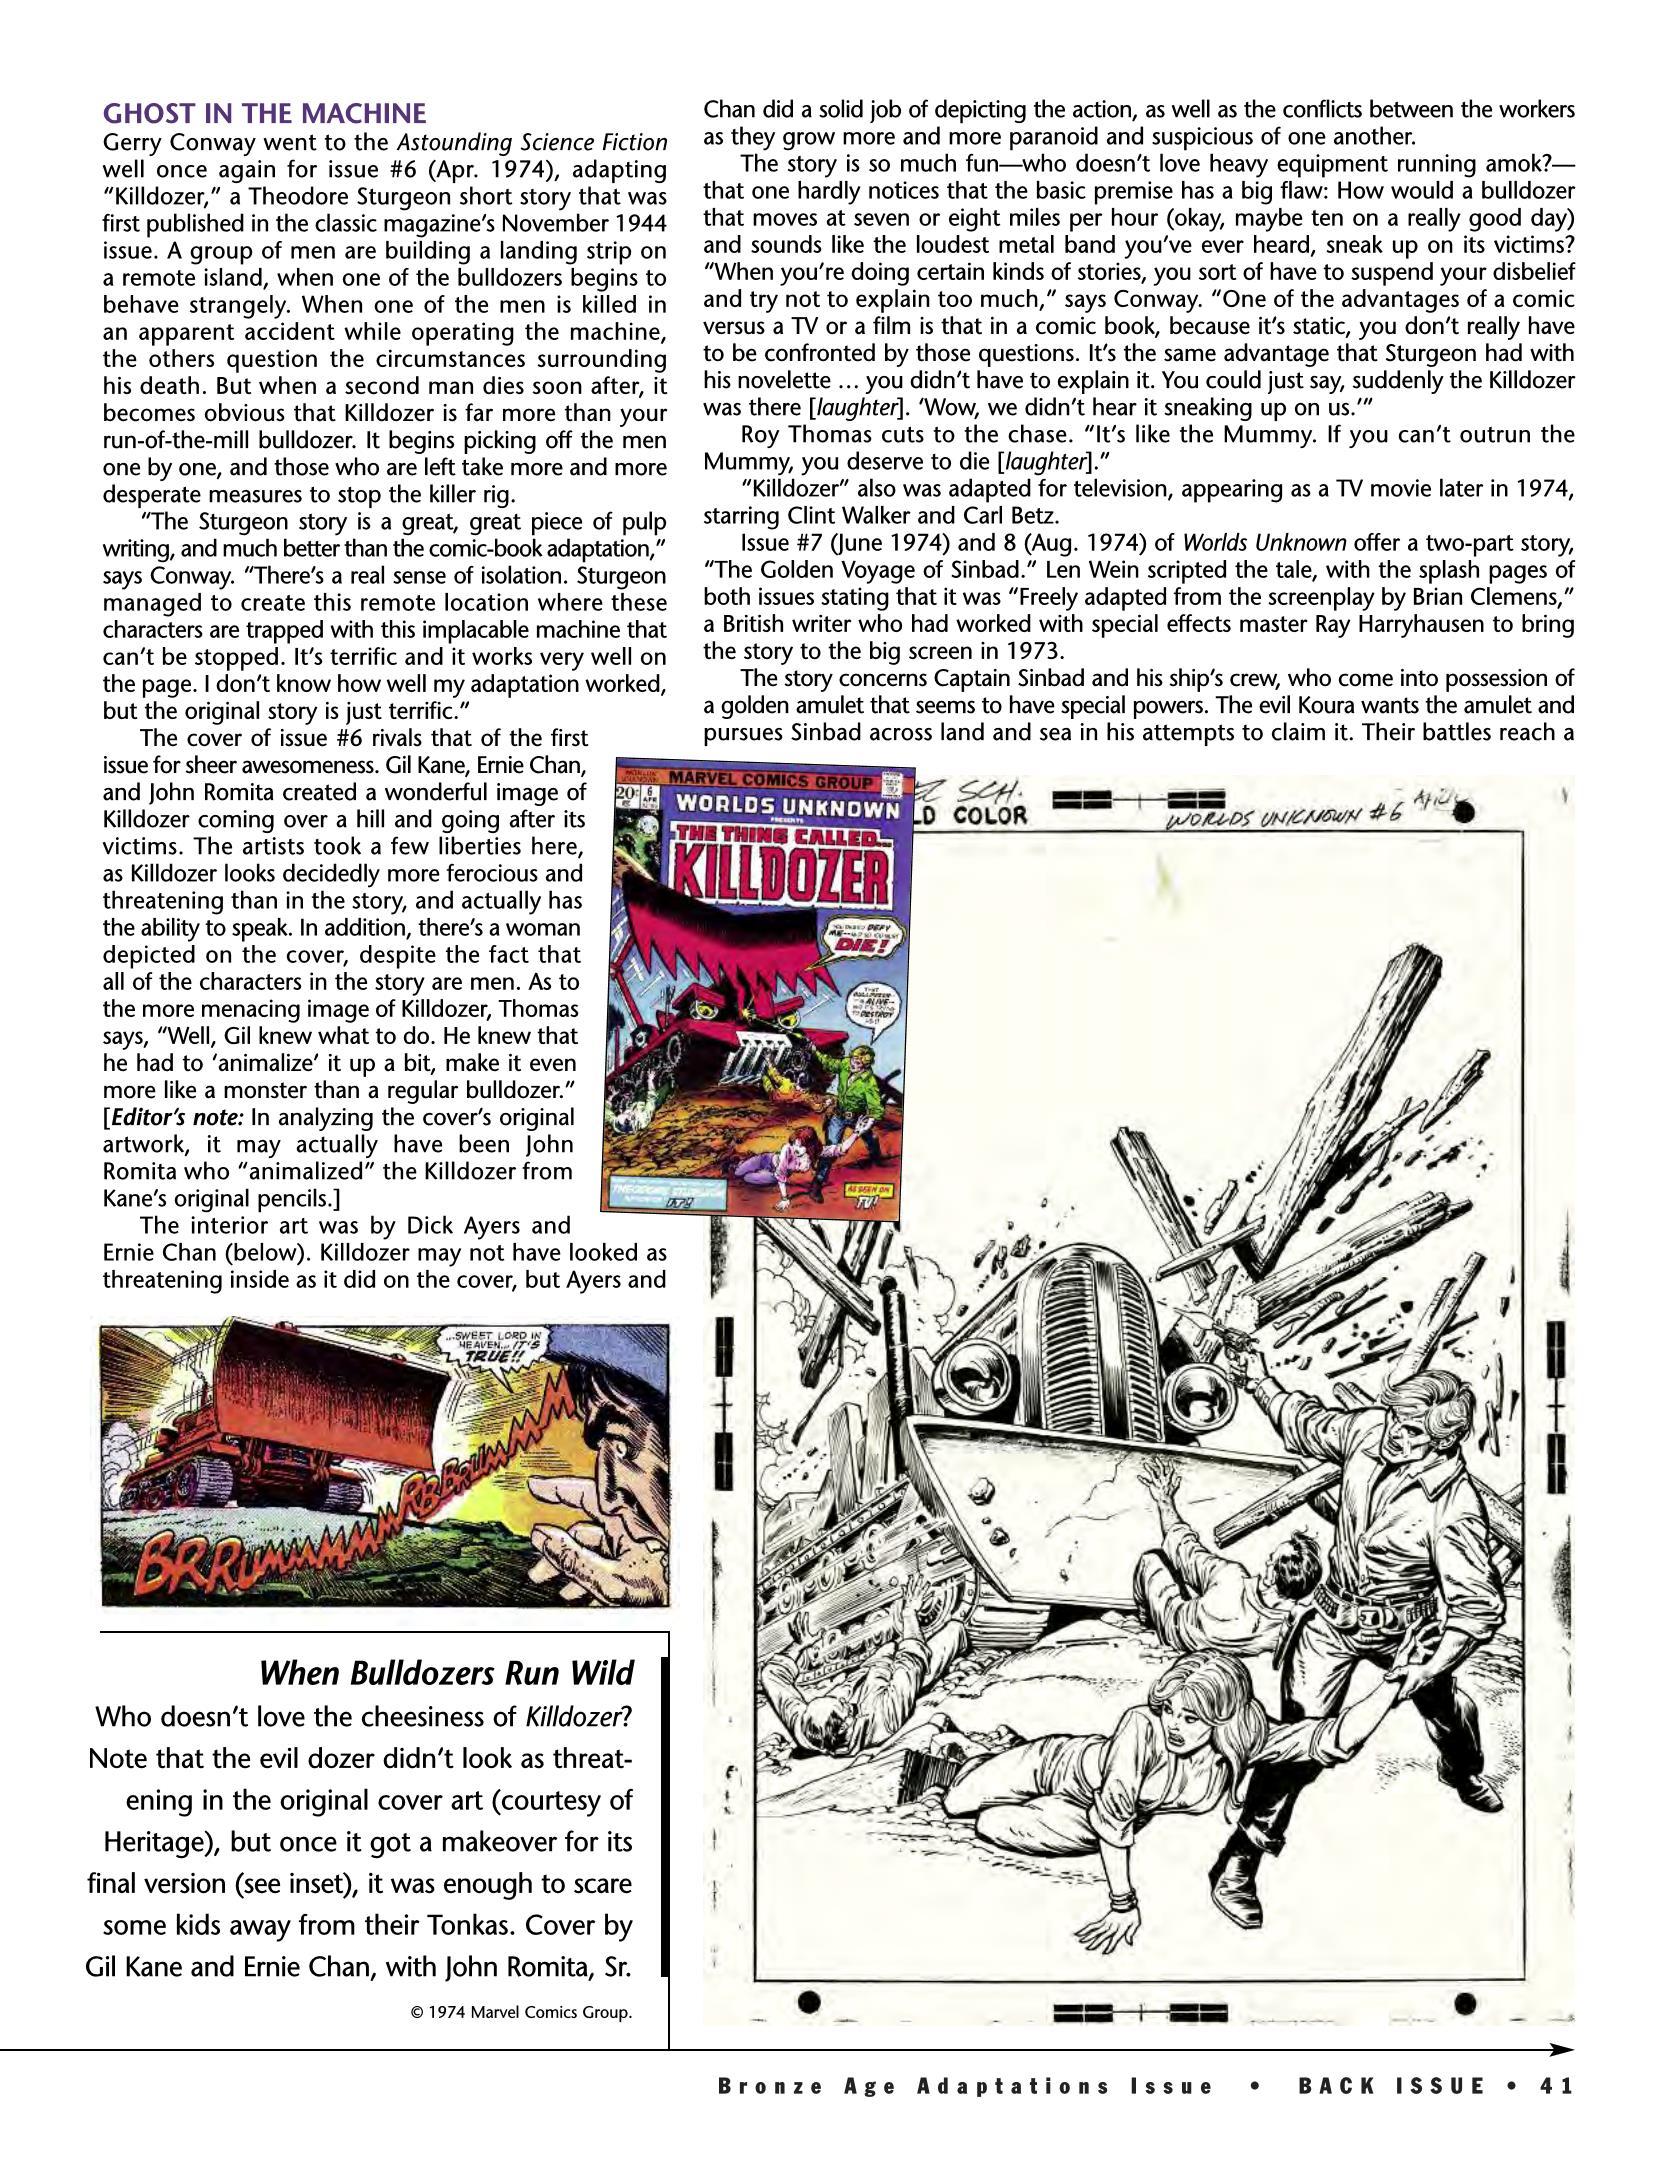 Read online Back Issue comic -  Issue #89 - 38